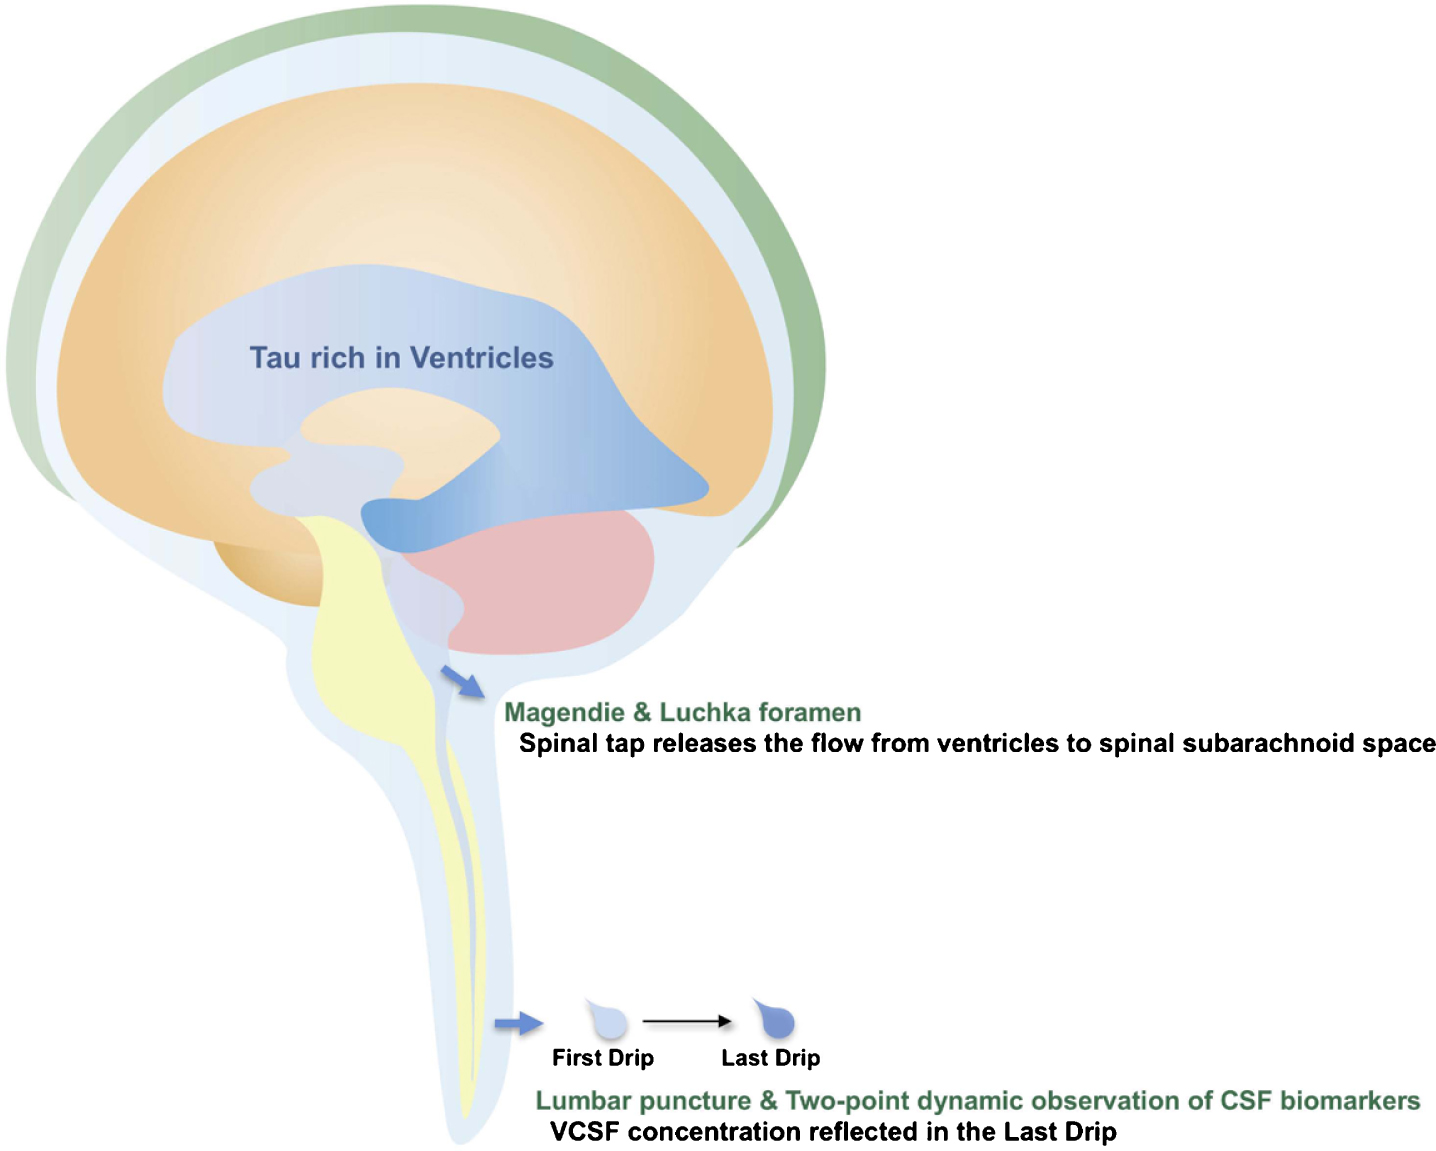 Schematic depiction of presumed CSF flow and tau passage during the tap test. Spinal tap releases a flow of CSF from ventricles to spinal subarachnoid space. In consequence, high concentration of tau in VCSF is reflected in the Last Drip.